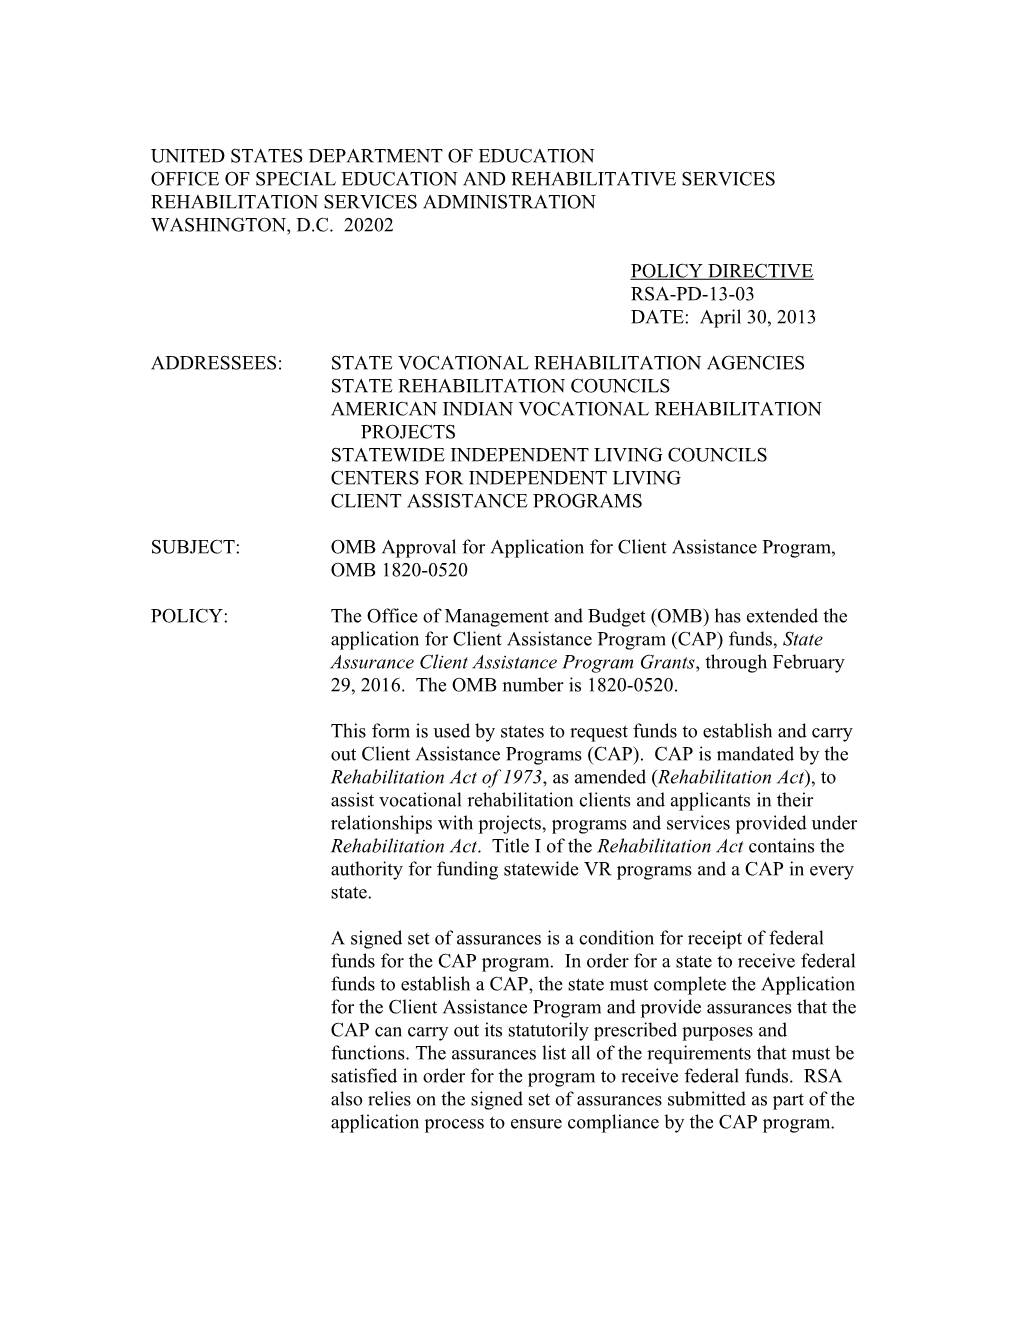 RSA-PD-13-03 - OMB Approval for Application for Client Assistance Program, OMB 1820-0520